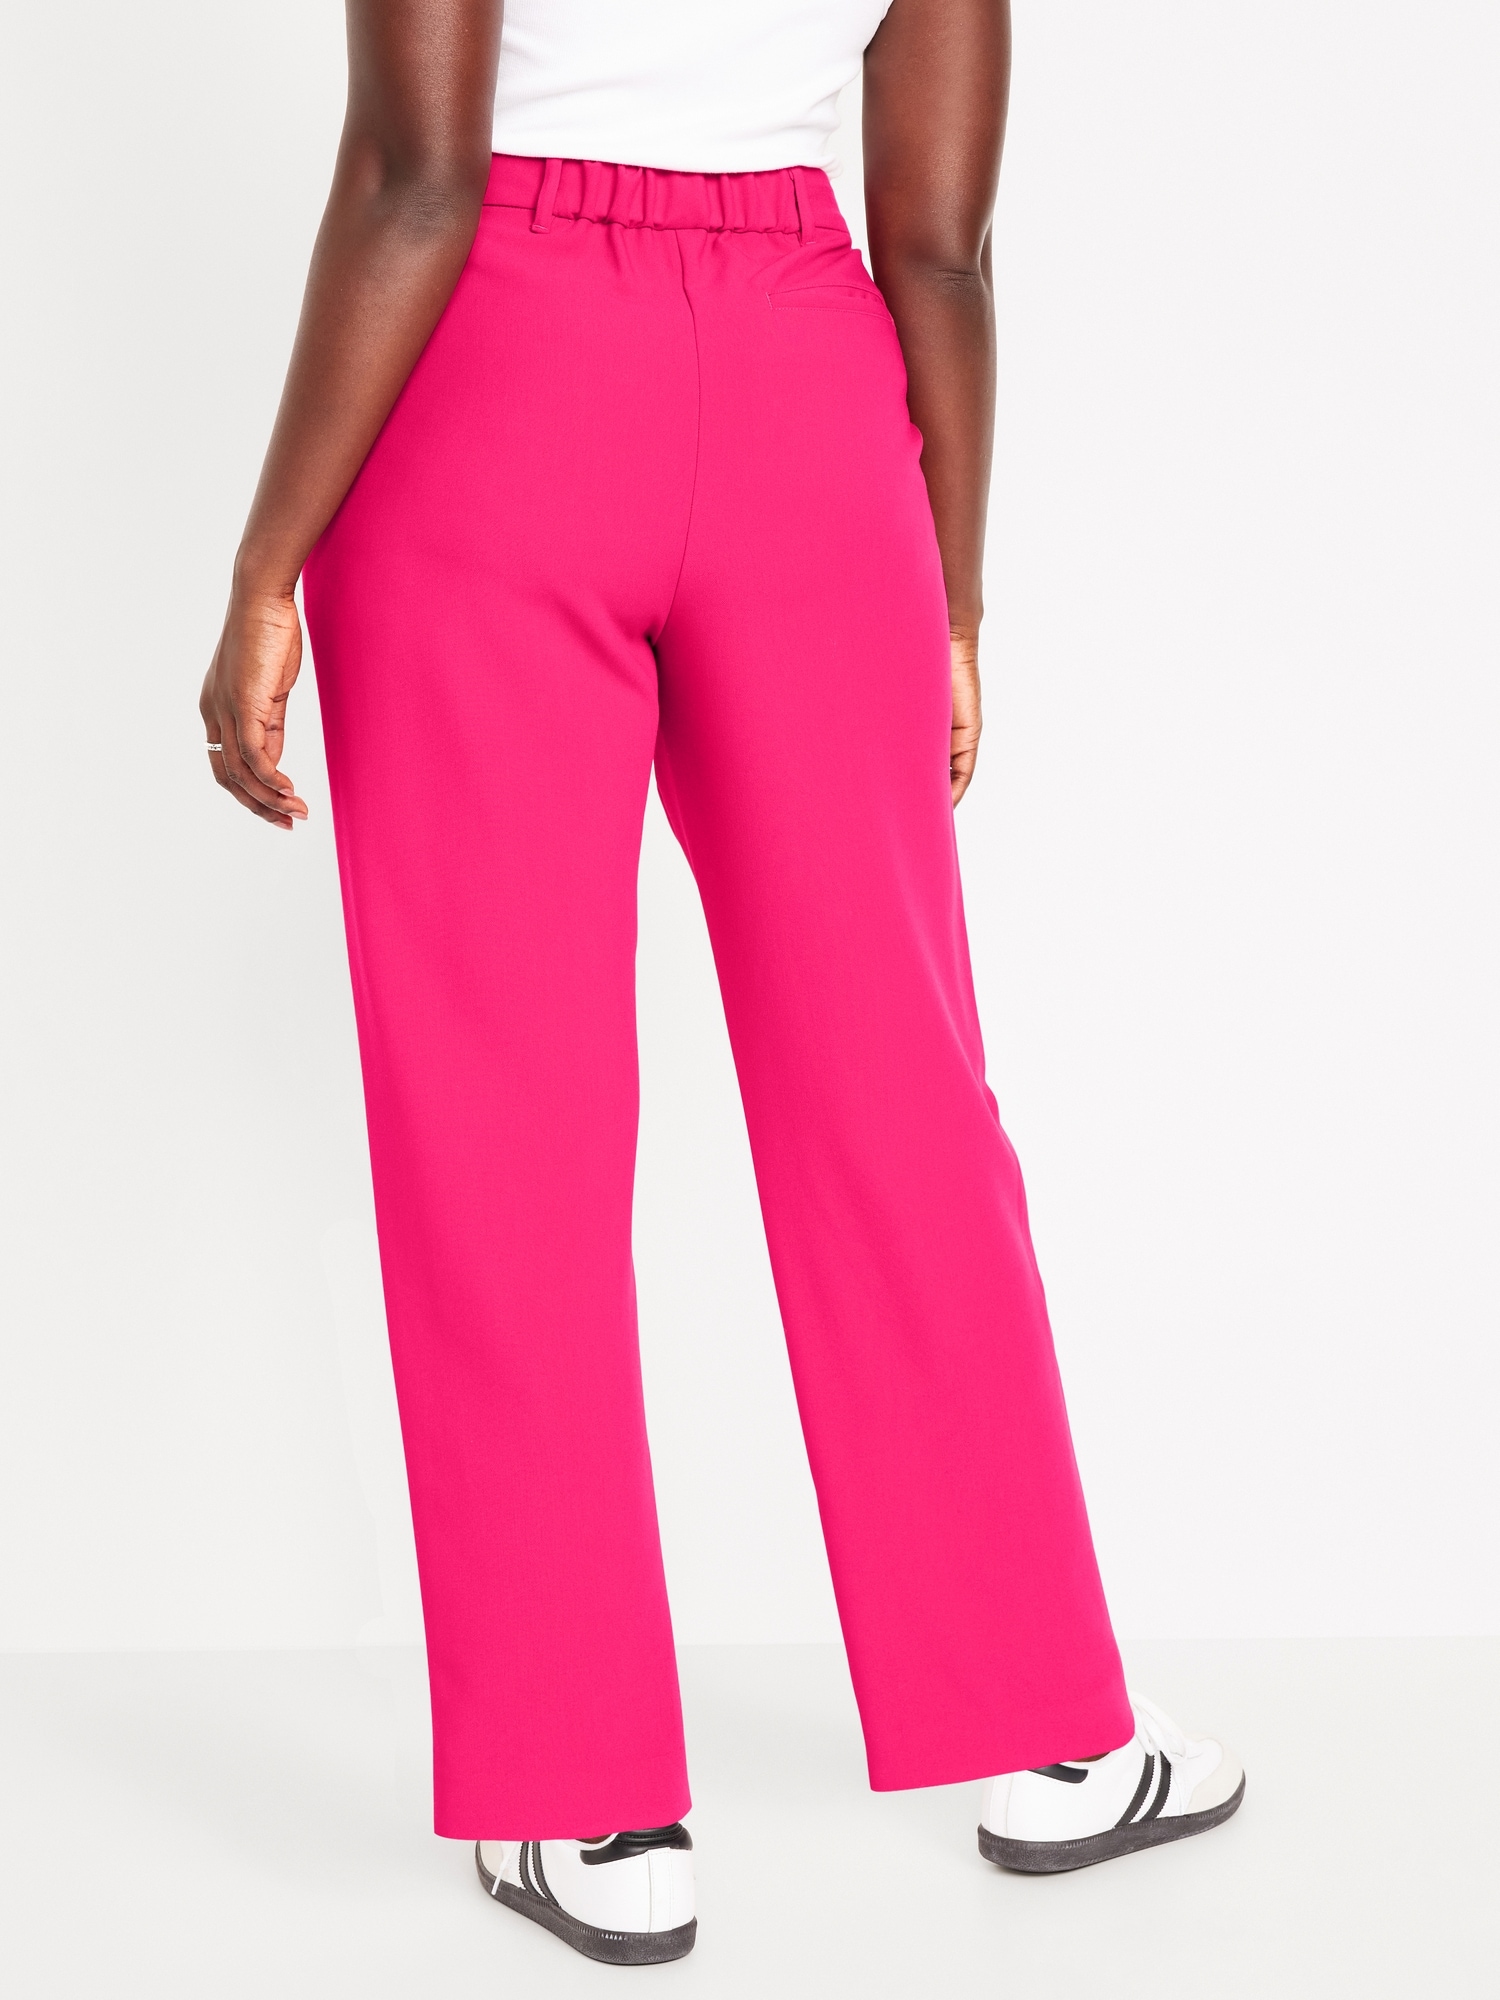 IN LOVE with these pants. Zara  Pants for women, Floral pants, Clothes